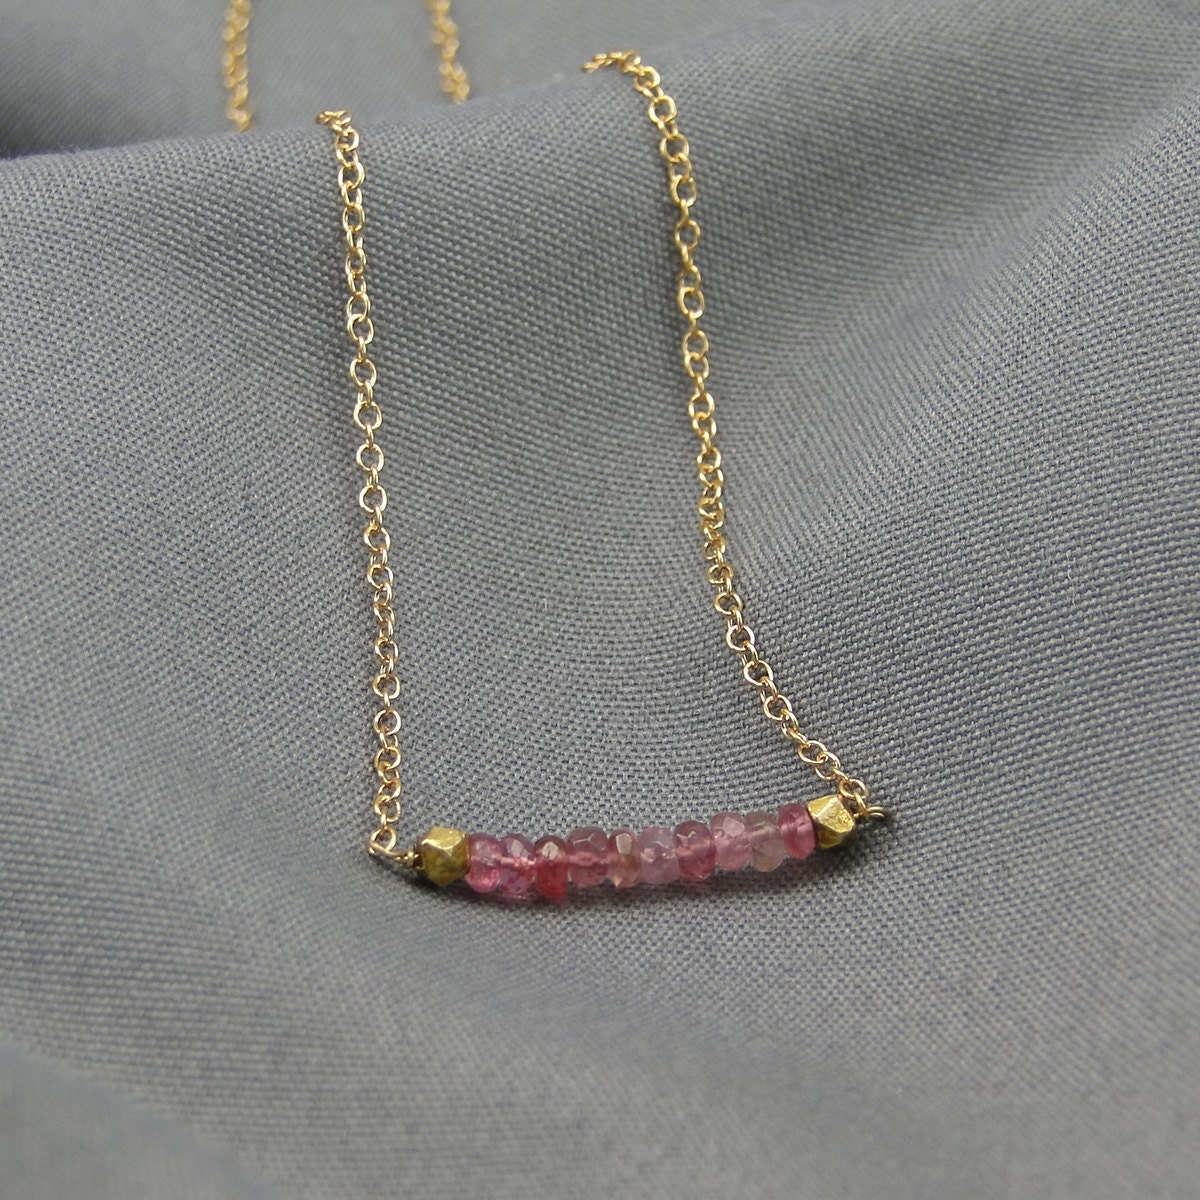 Gemstone Bar Necklaces Dainty 14k Gold Fill Necklace